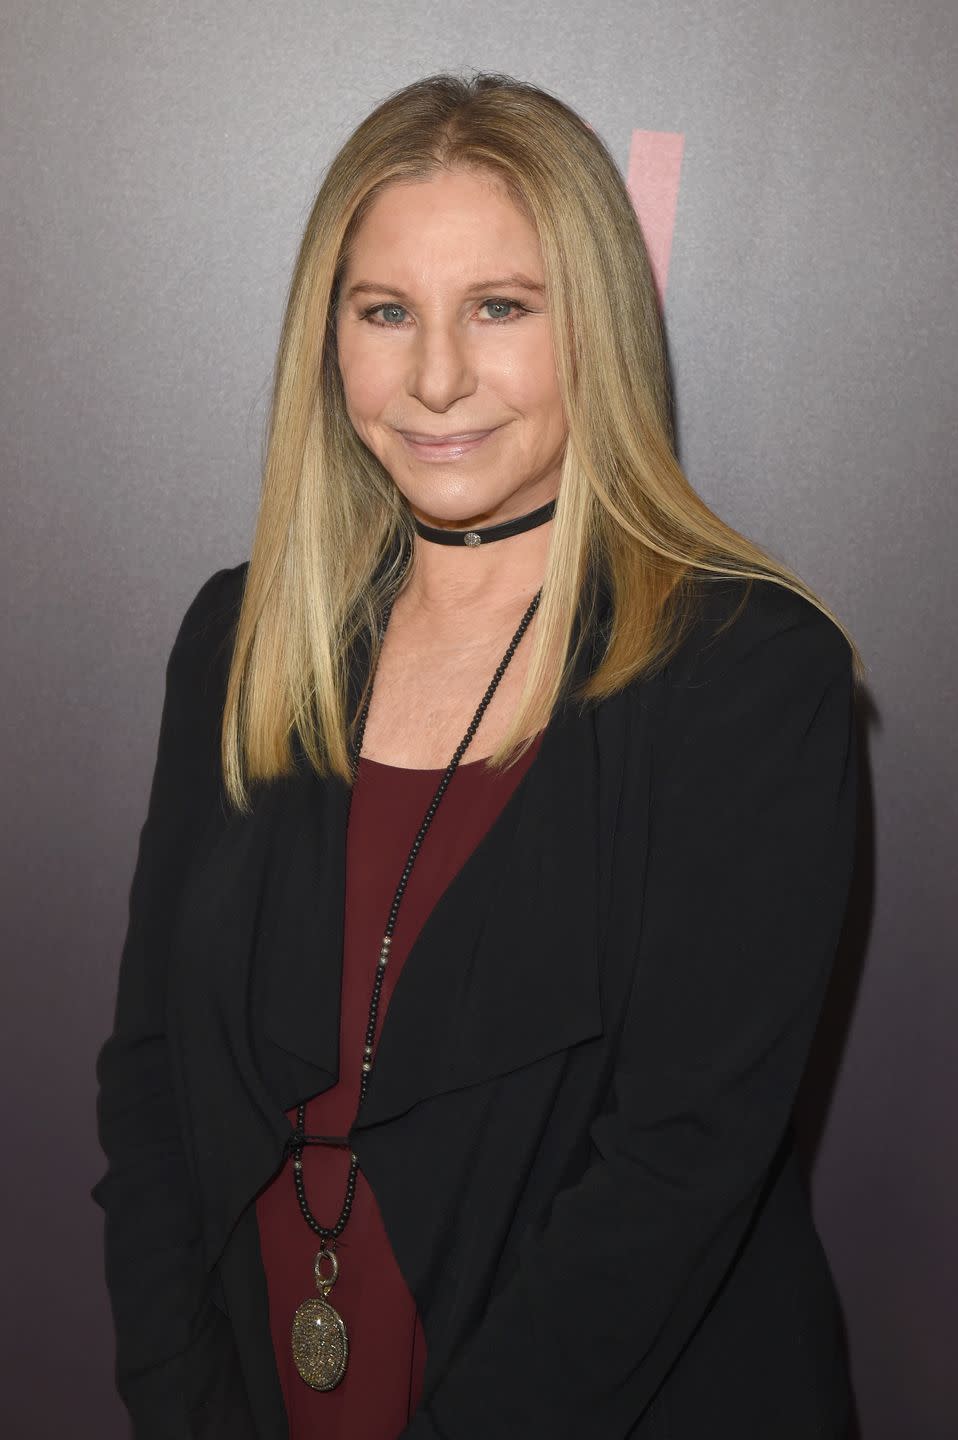 barbra streisand wearing a red top, black blazer and necklace